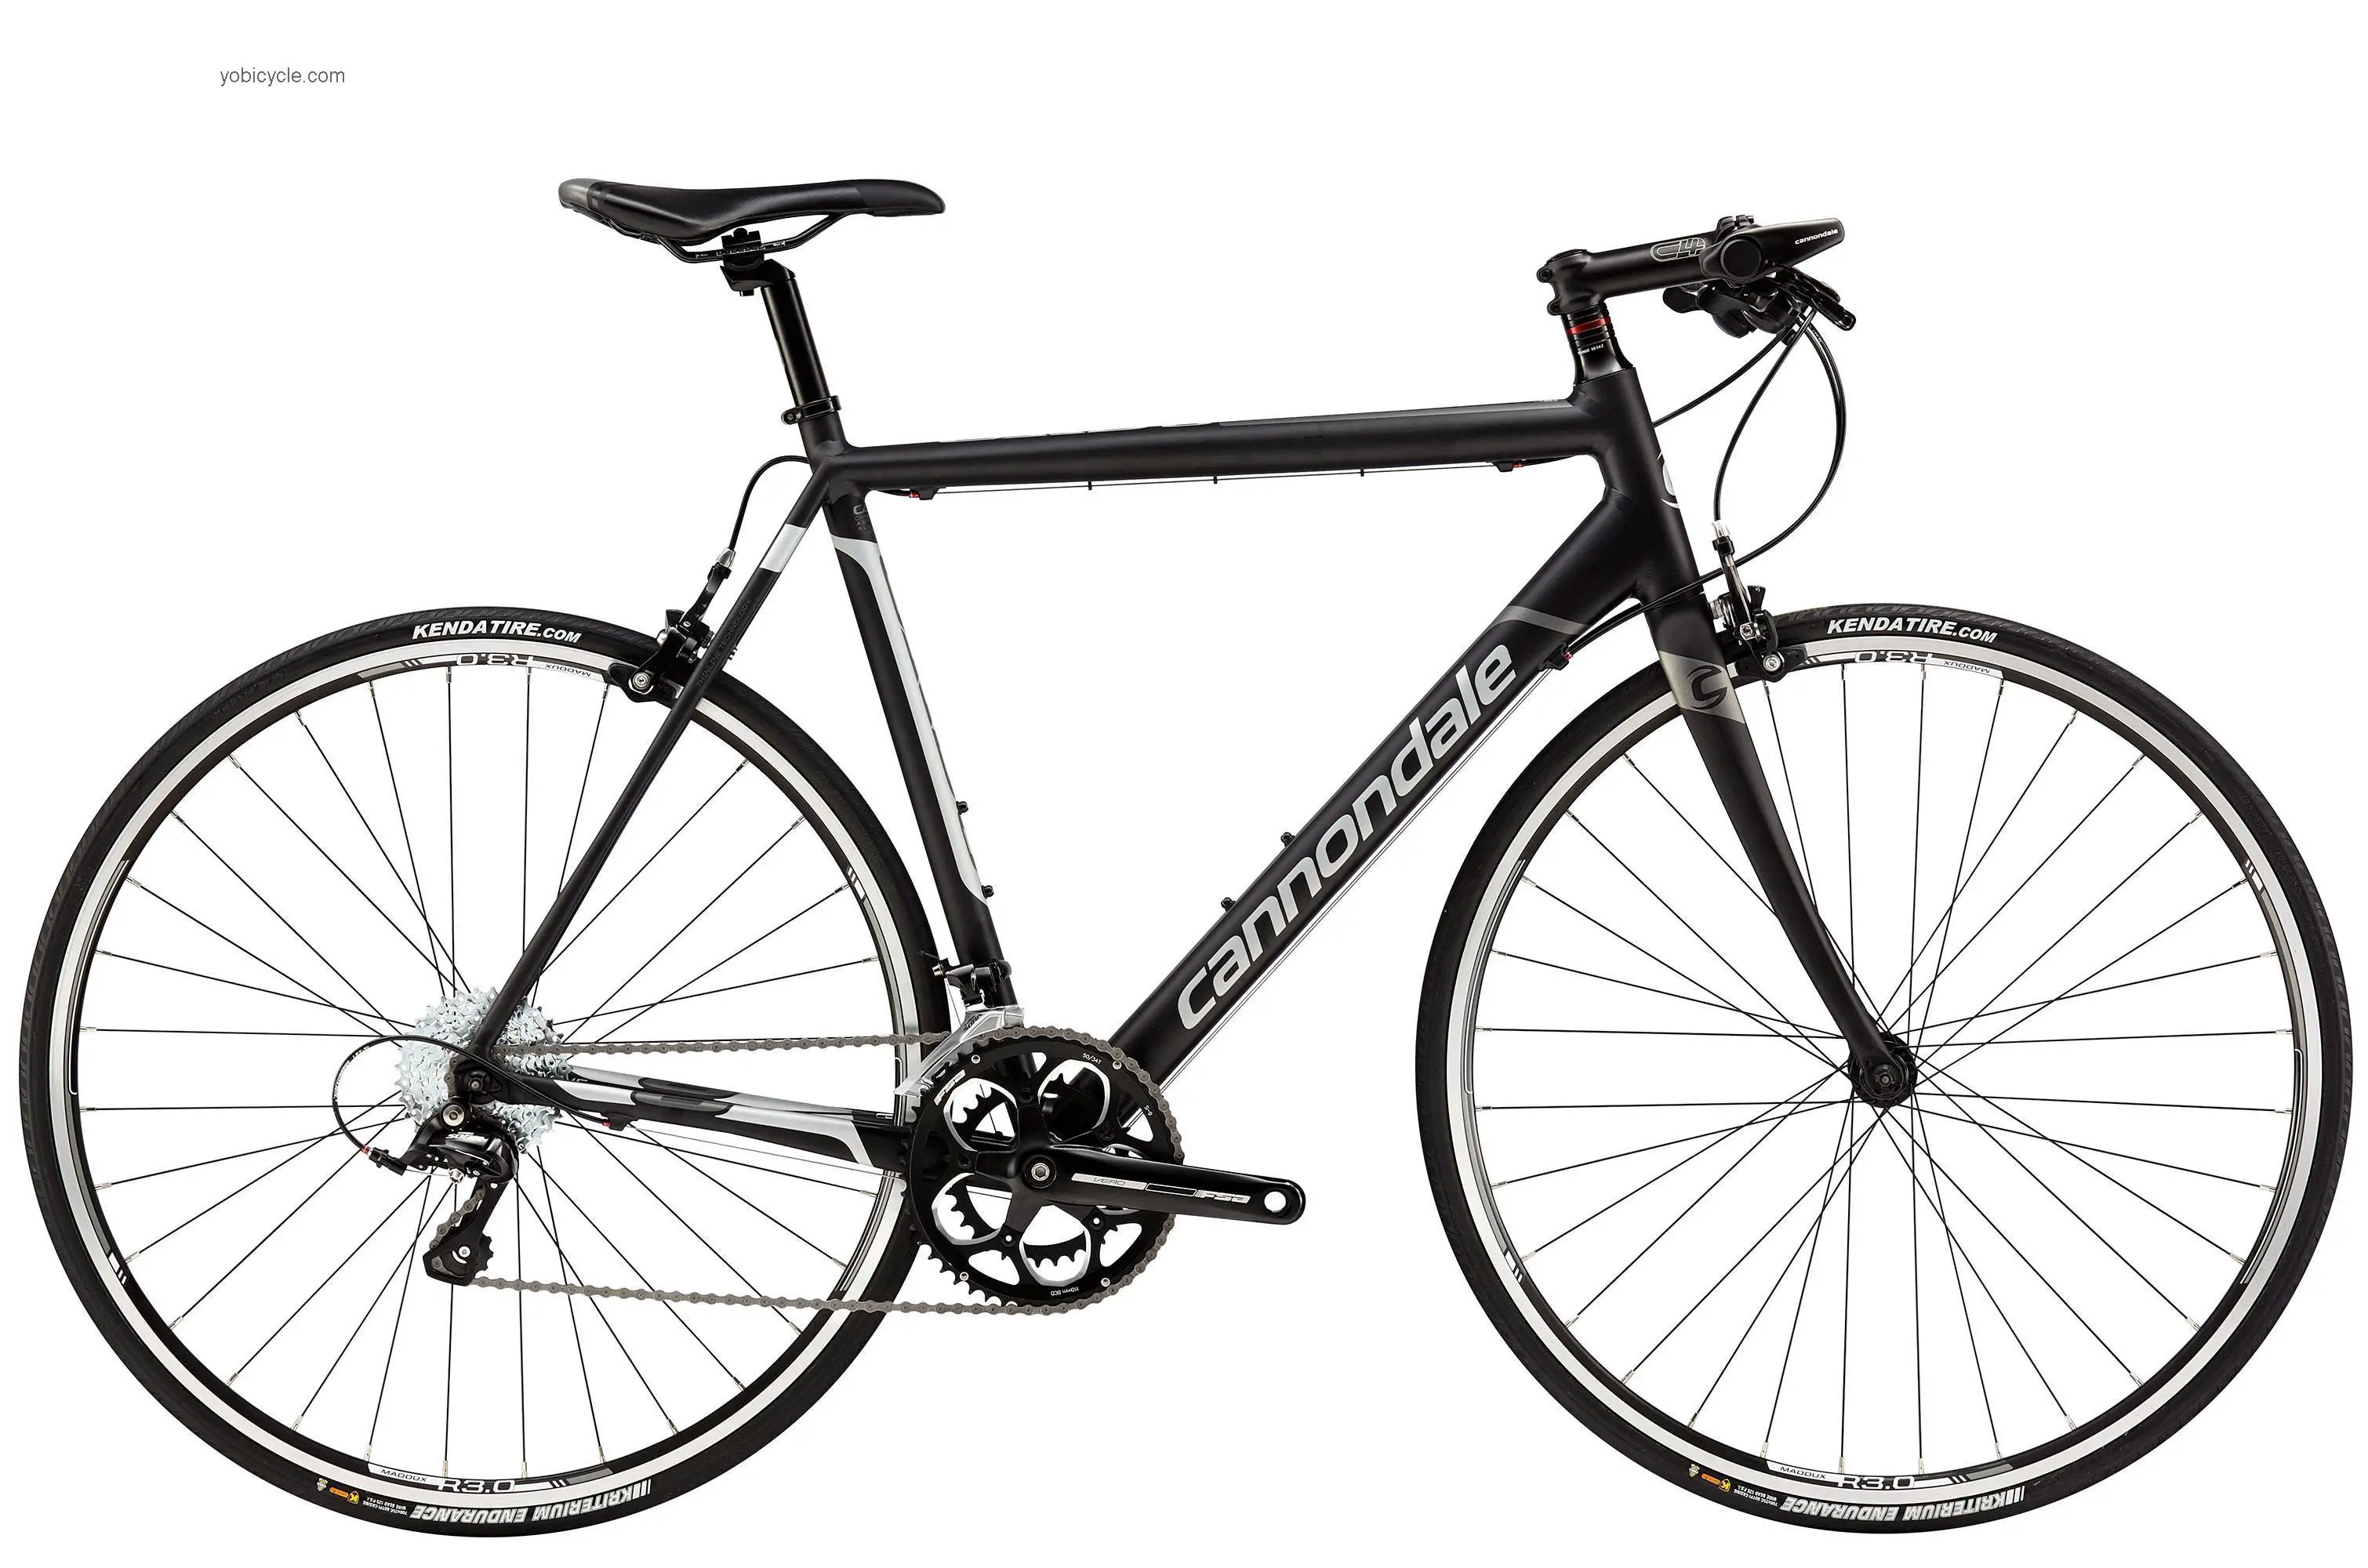 Cannondale CAAD8 FLAT BAR 1 2015 comparison online with competitors